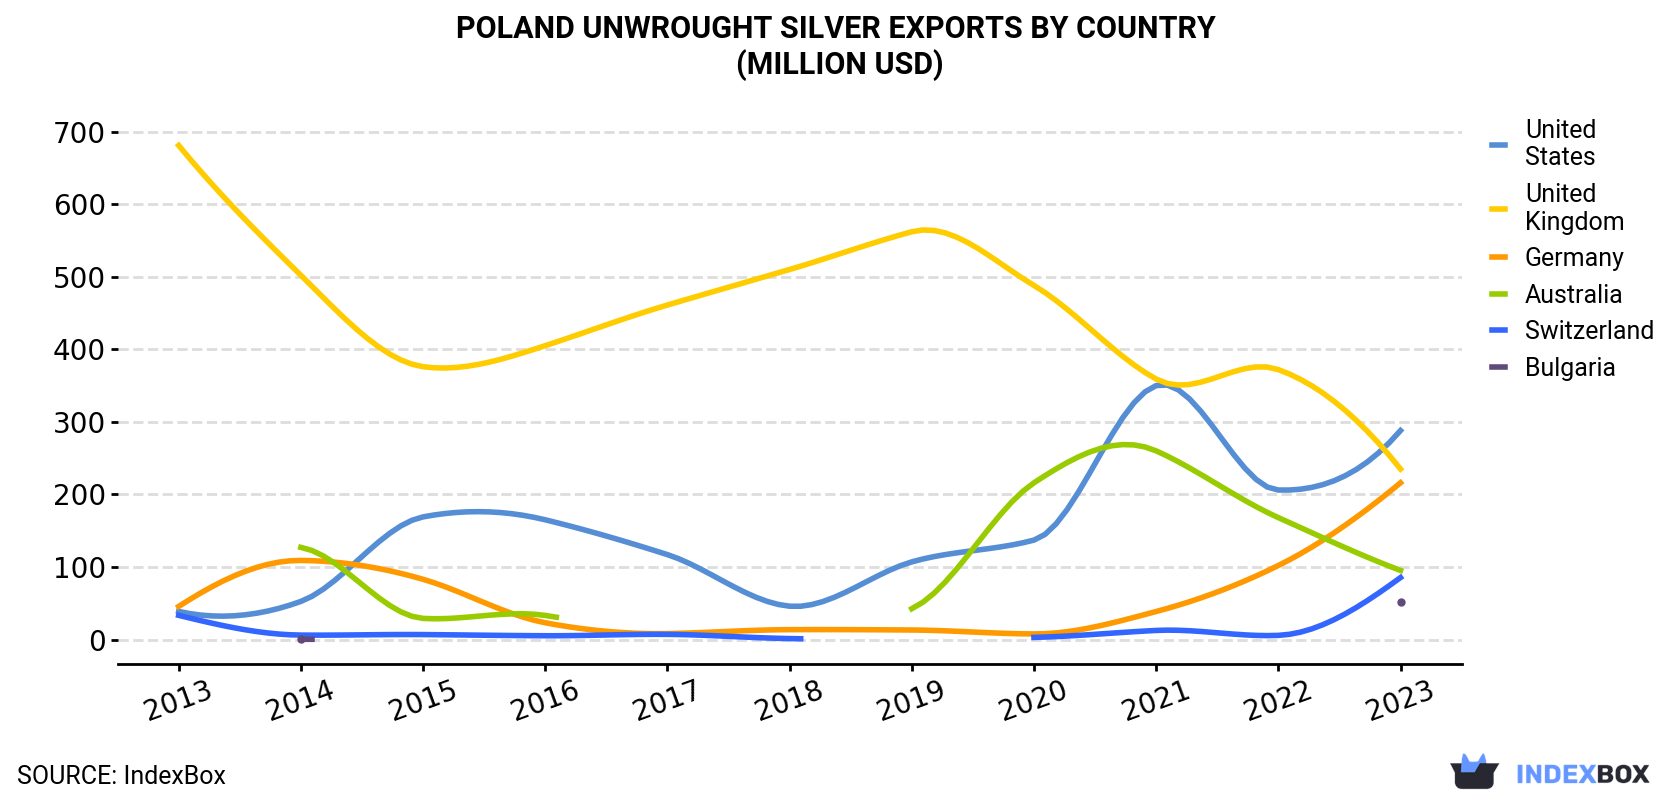 Poland Unwrought Silver Exports By Country (Million USD)